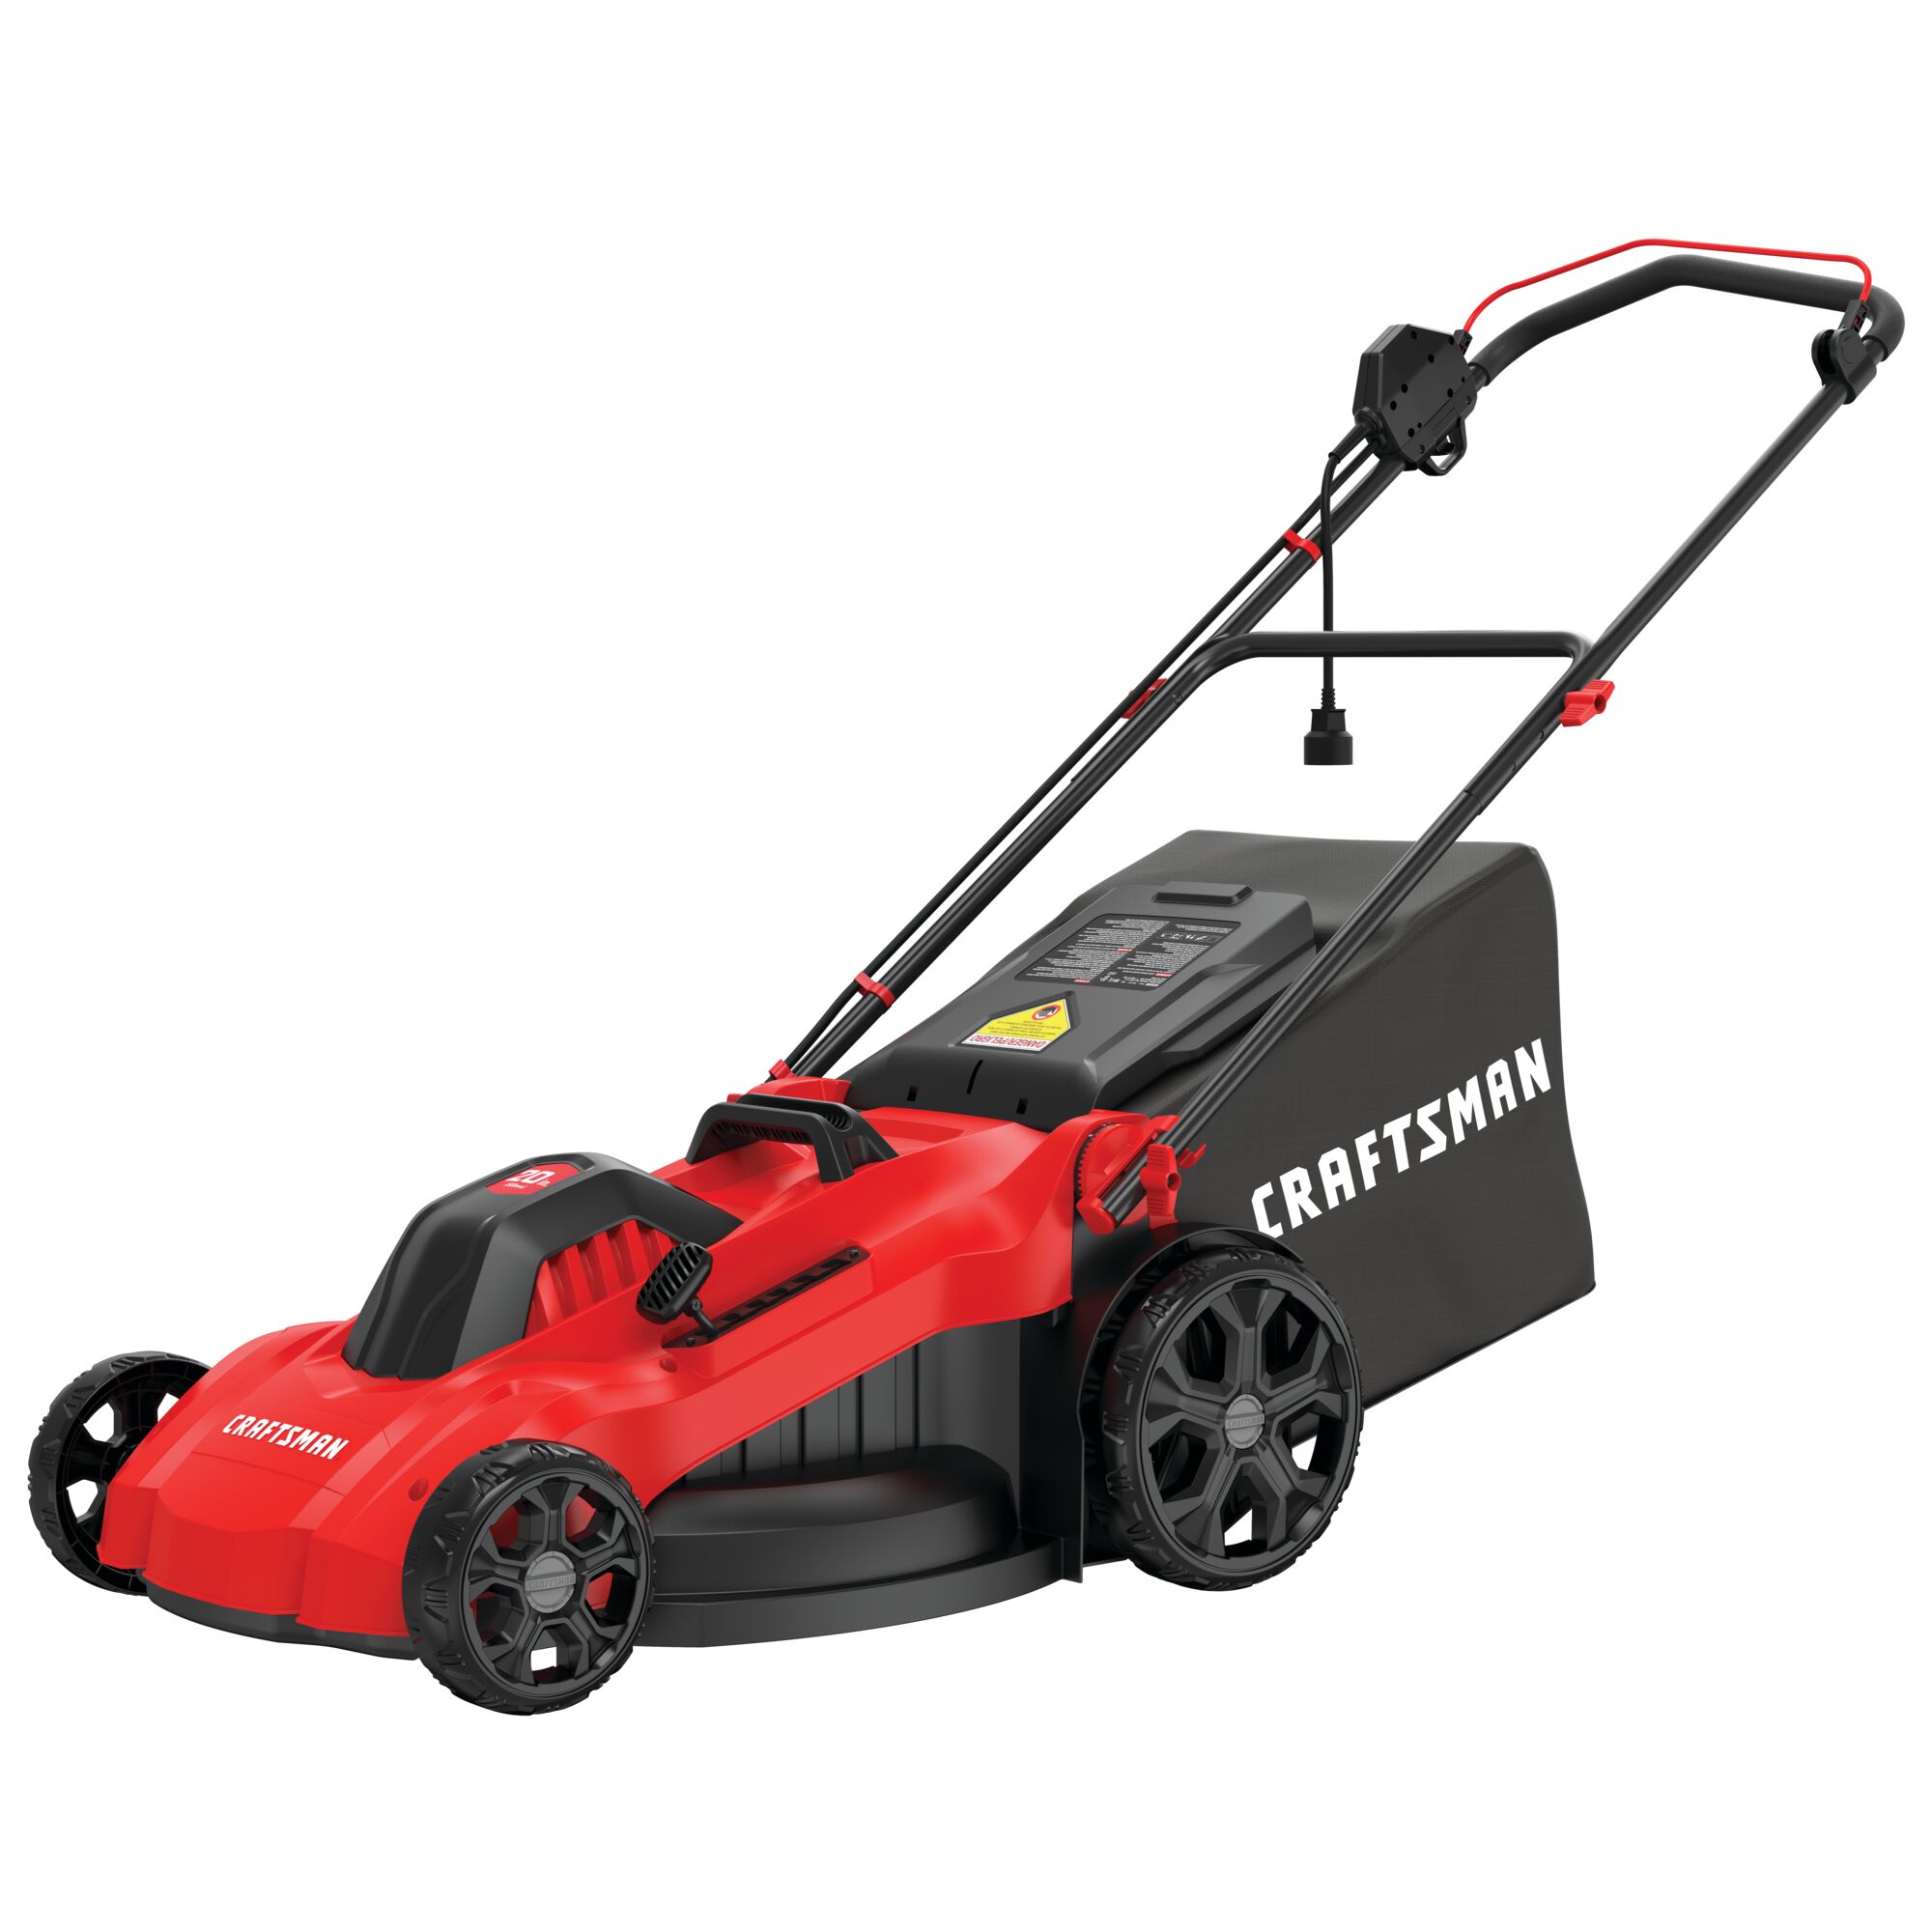 Profile of 13 amp 20 inch corded 3 in 1 lawn mower.